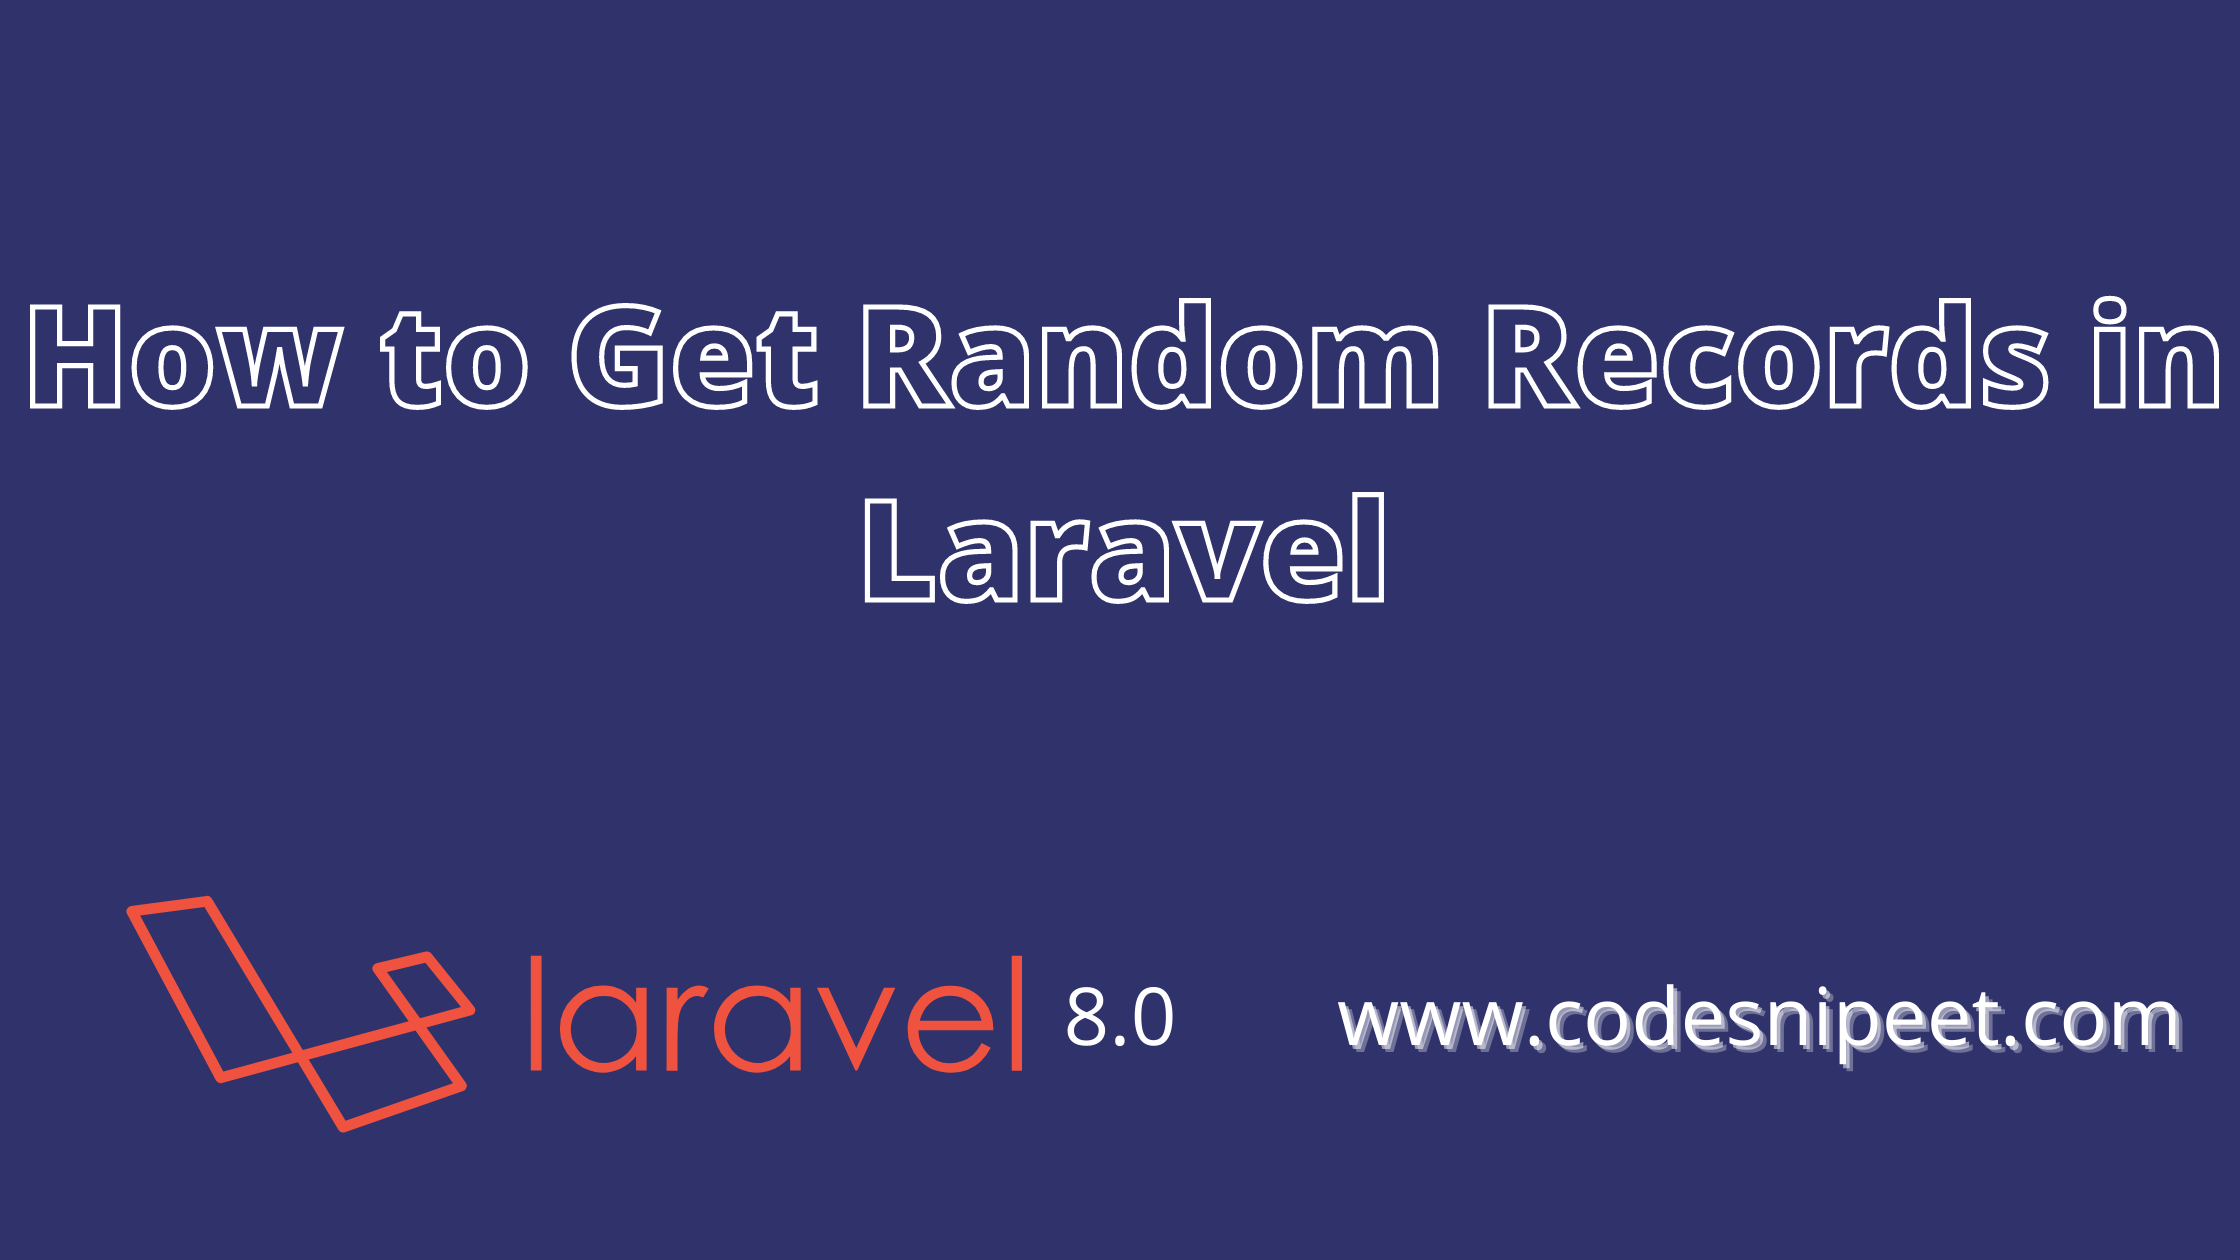 You are currently viewing How to Get Random Records in Laravel